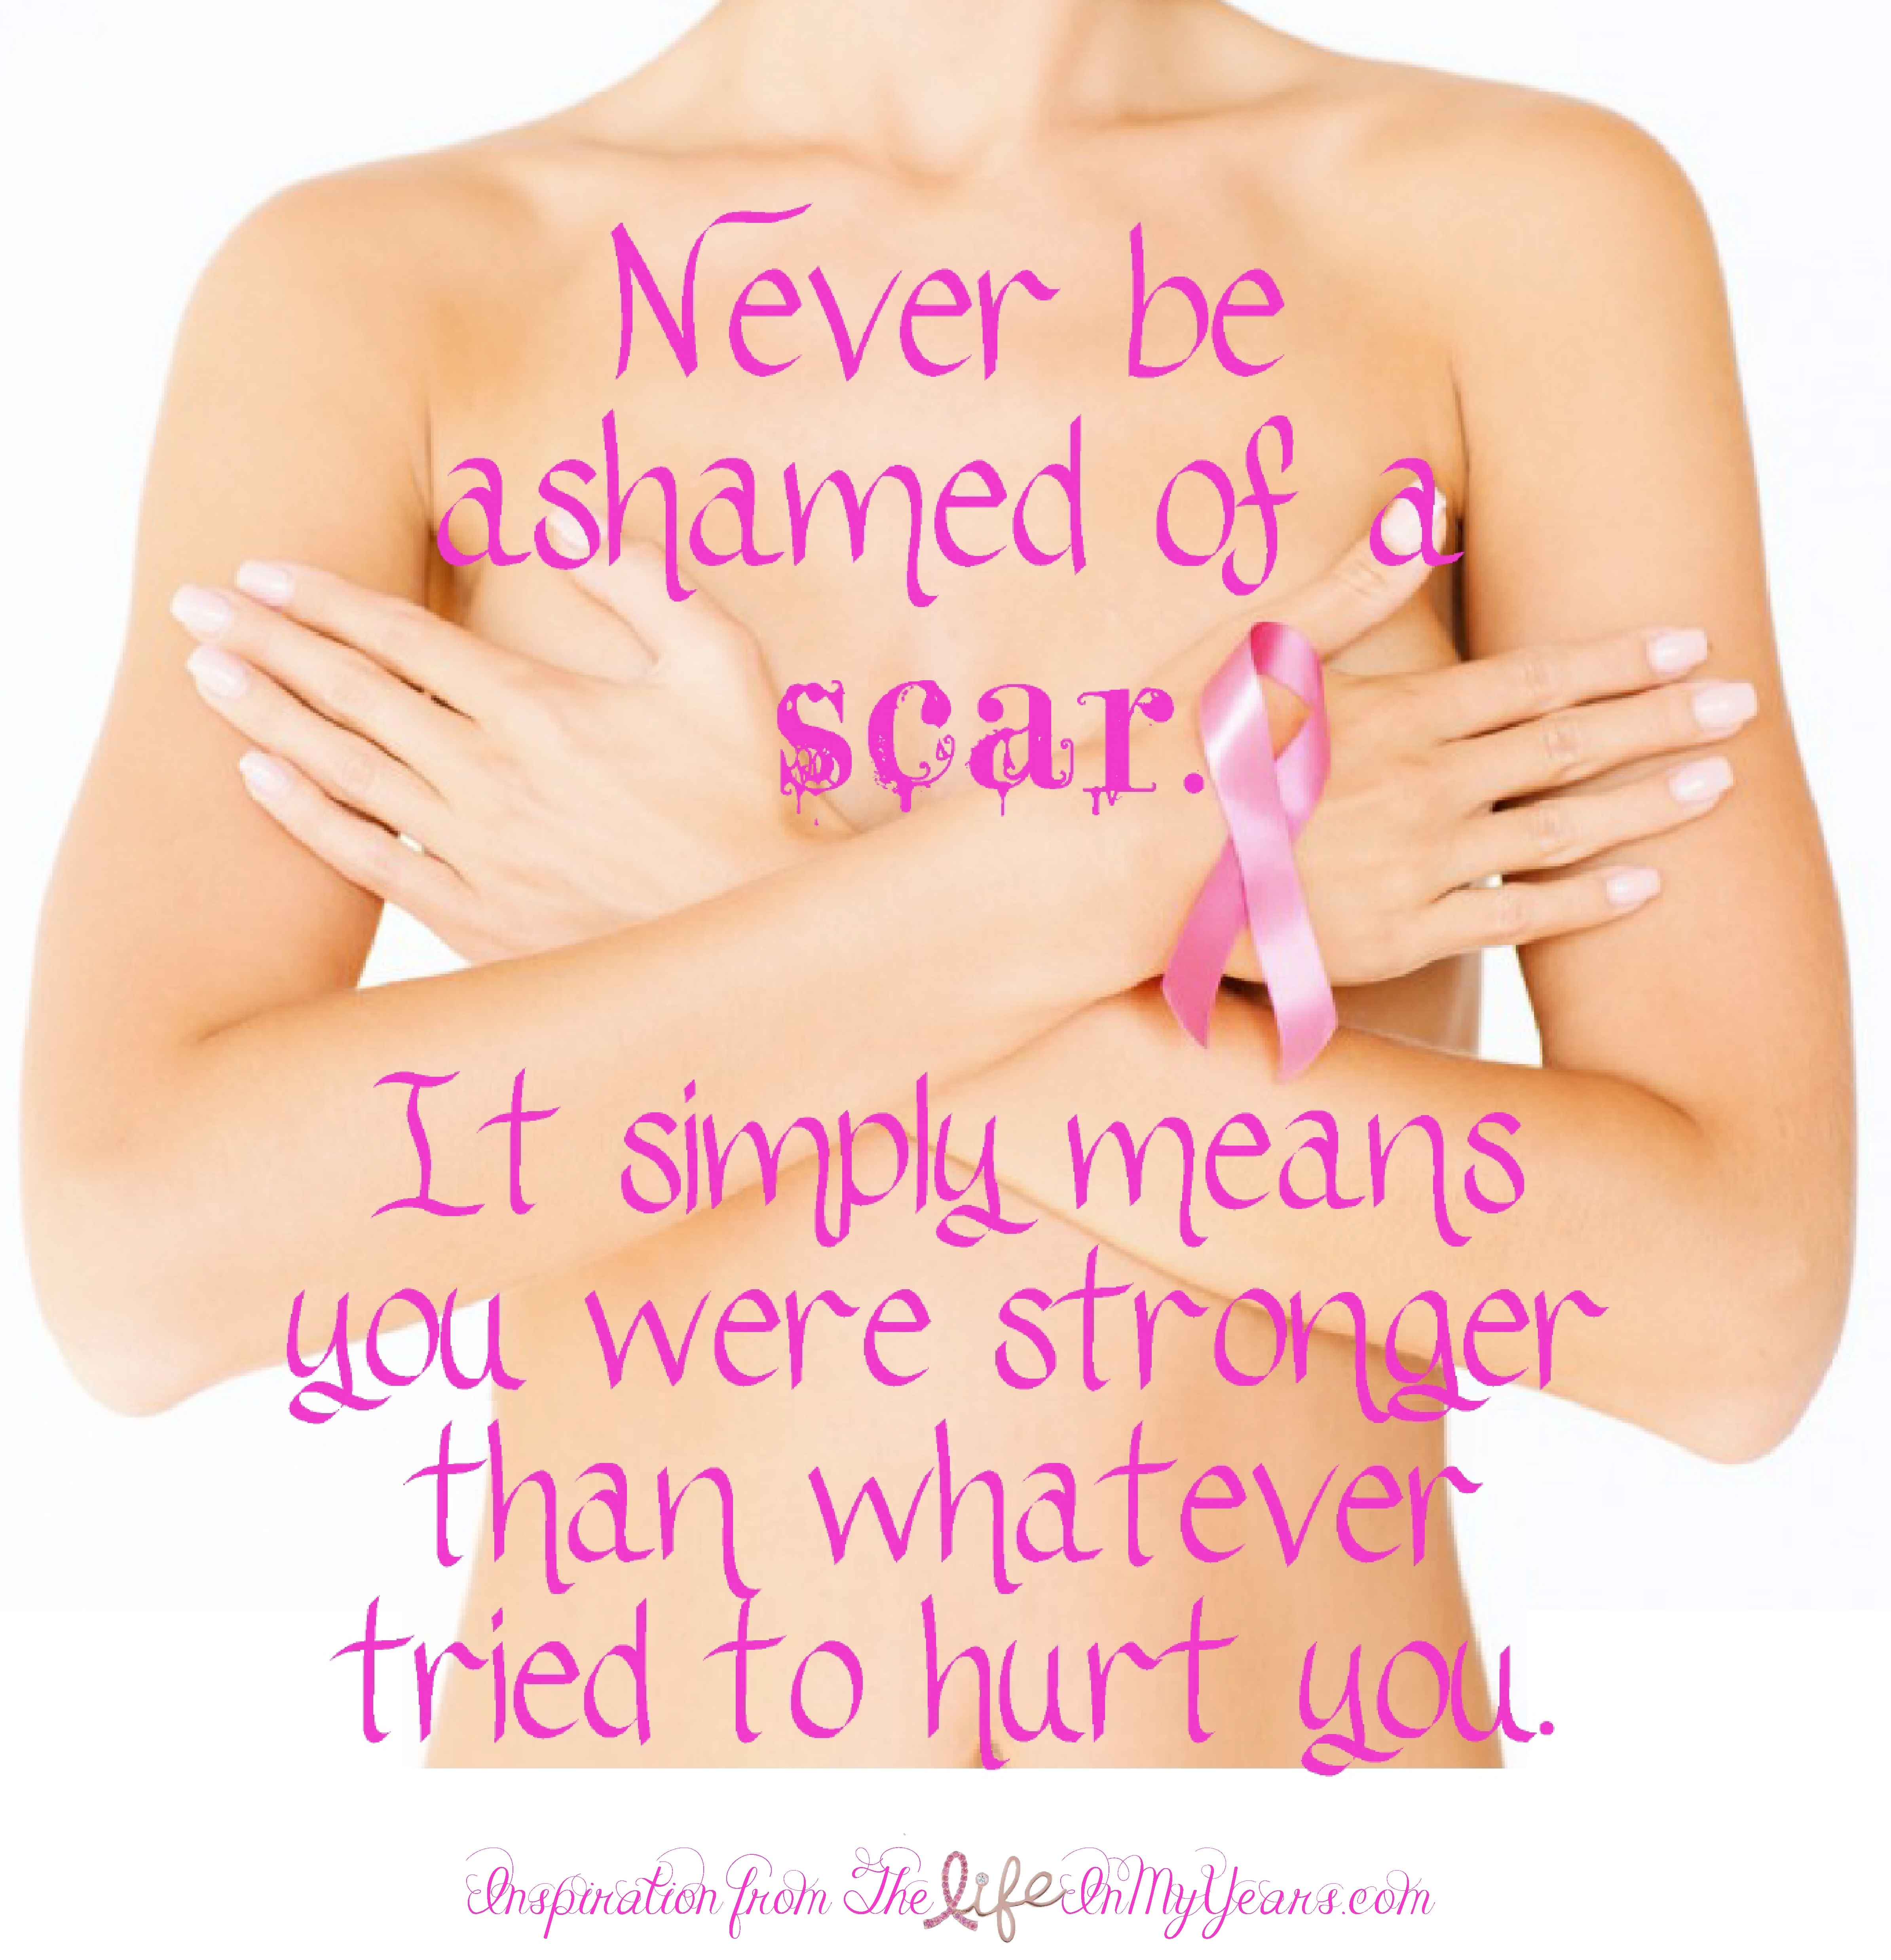 Breast Cancer Scars - Never be ashamed of a scar. It simply means you were stronger than whatever tried to hurt you.